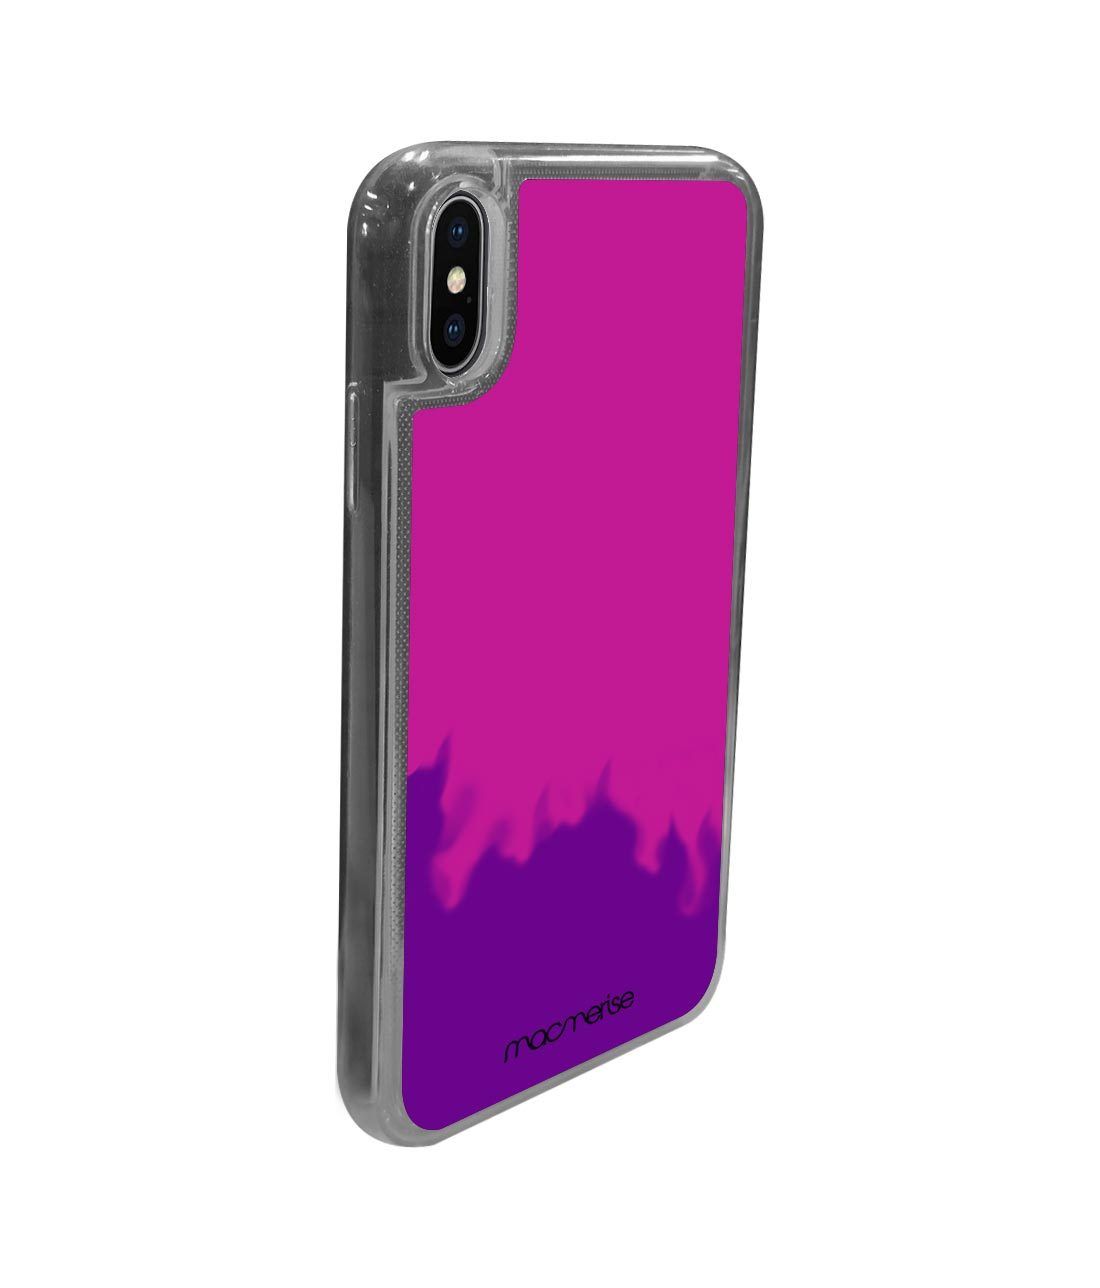 Neon Sand Purple Pink - Neon Sand Phone Case for iPhone XS